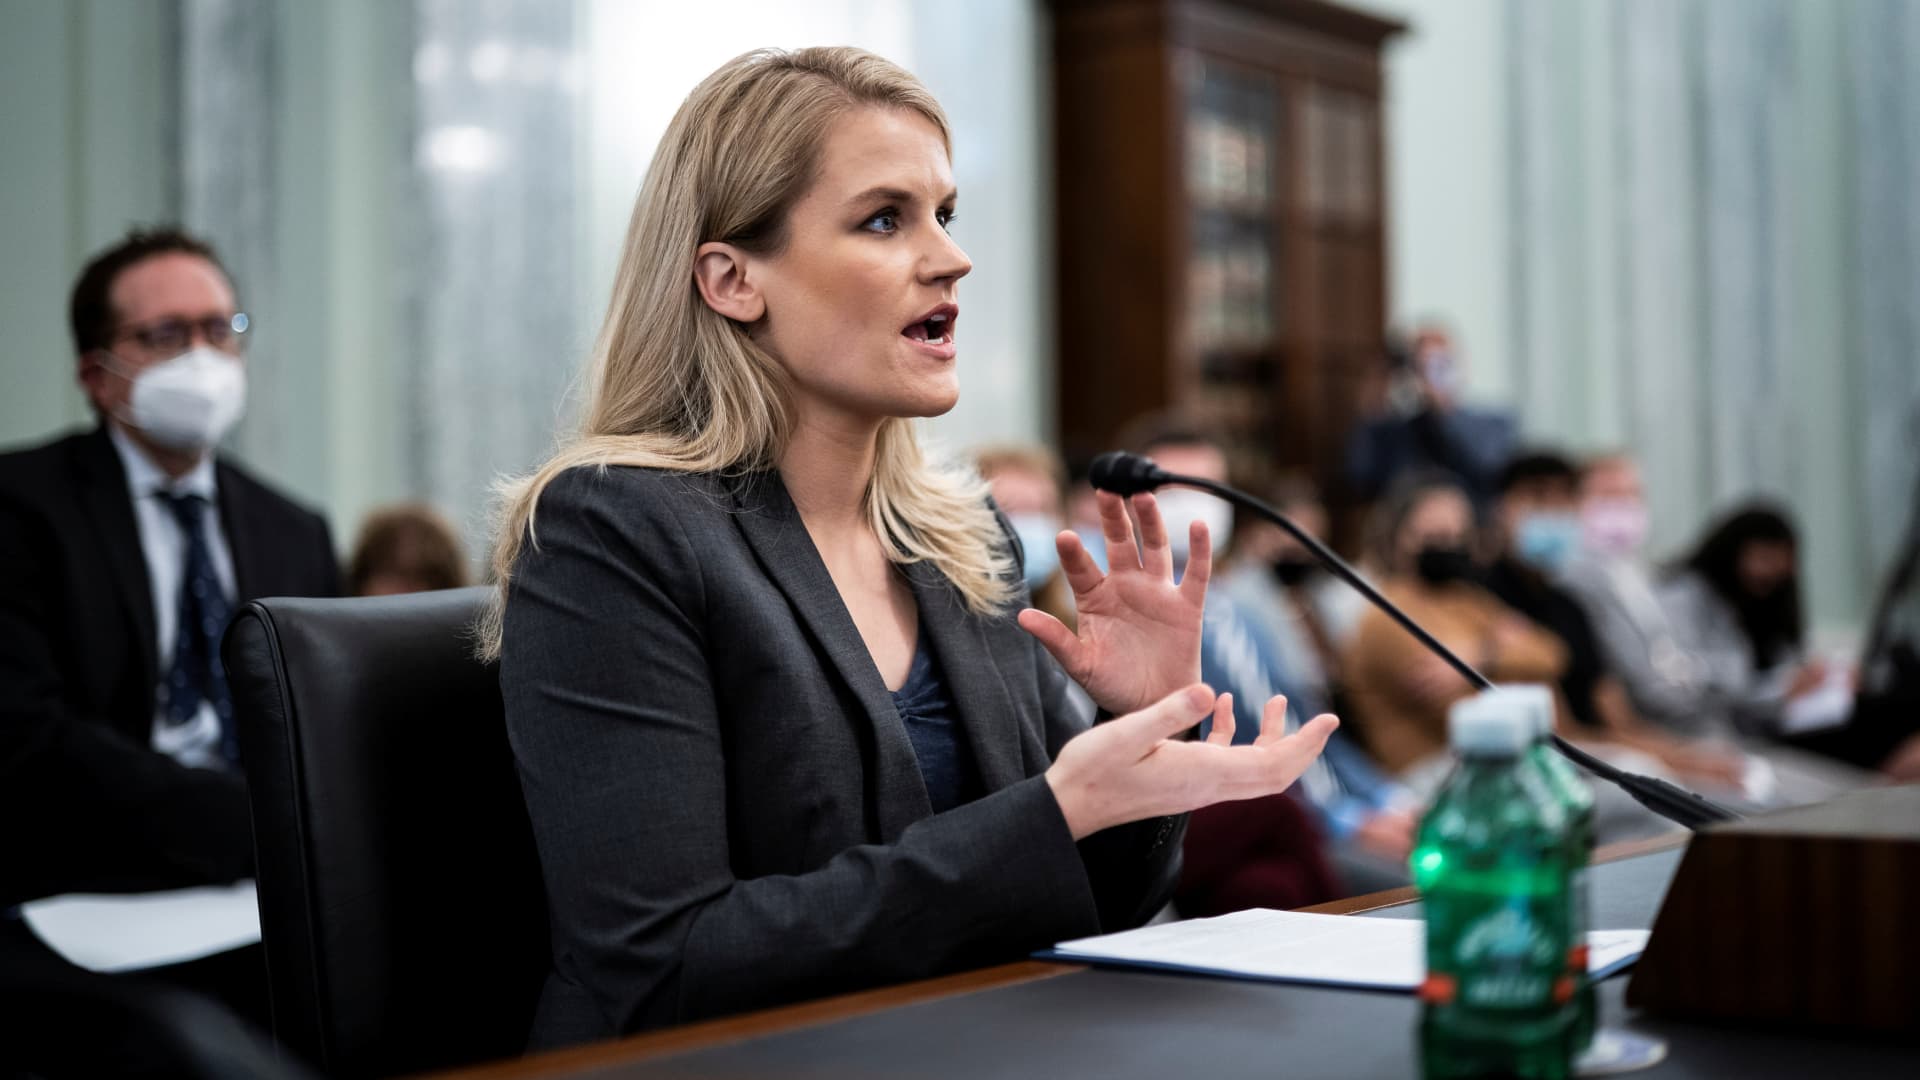 Former Facebook employee and whistleblower Frances Haugen testifies during a Senate Committee on Commerce, Science, and Transportation hearing entitled 'Protecting Kids Online: Testimony from a Facebook Whistleblower' on Capitol Hill, in Washington, U.S., October 5, 2021.